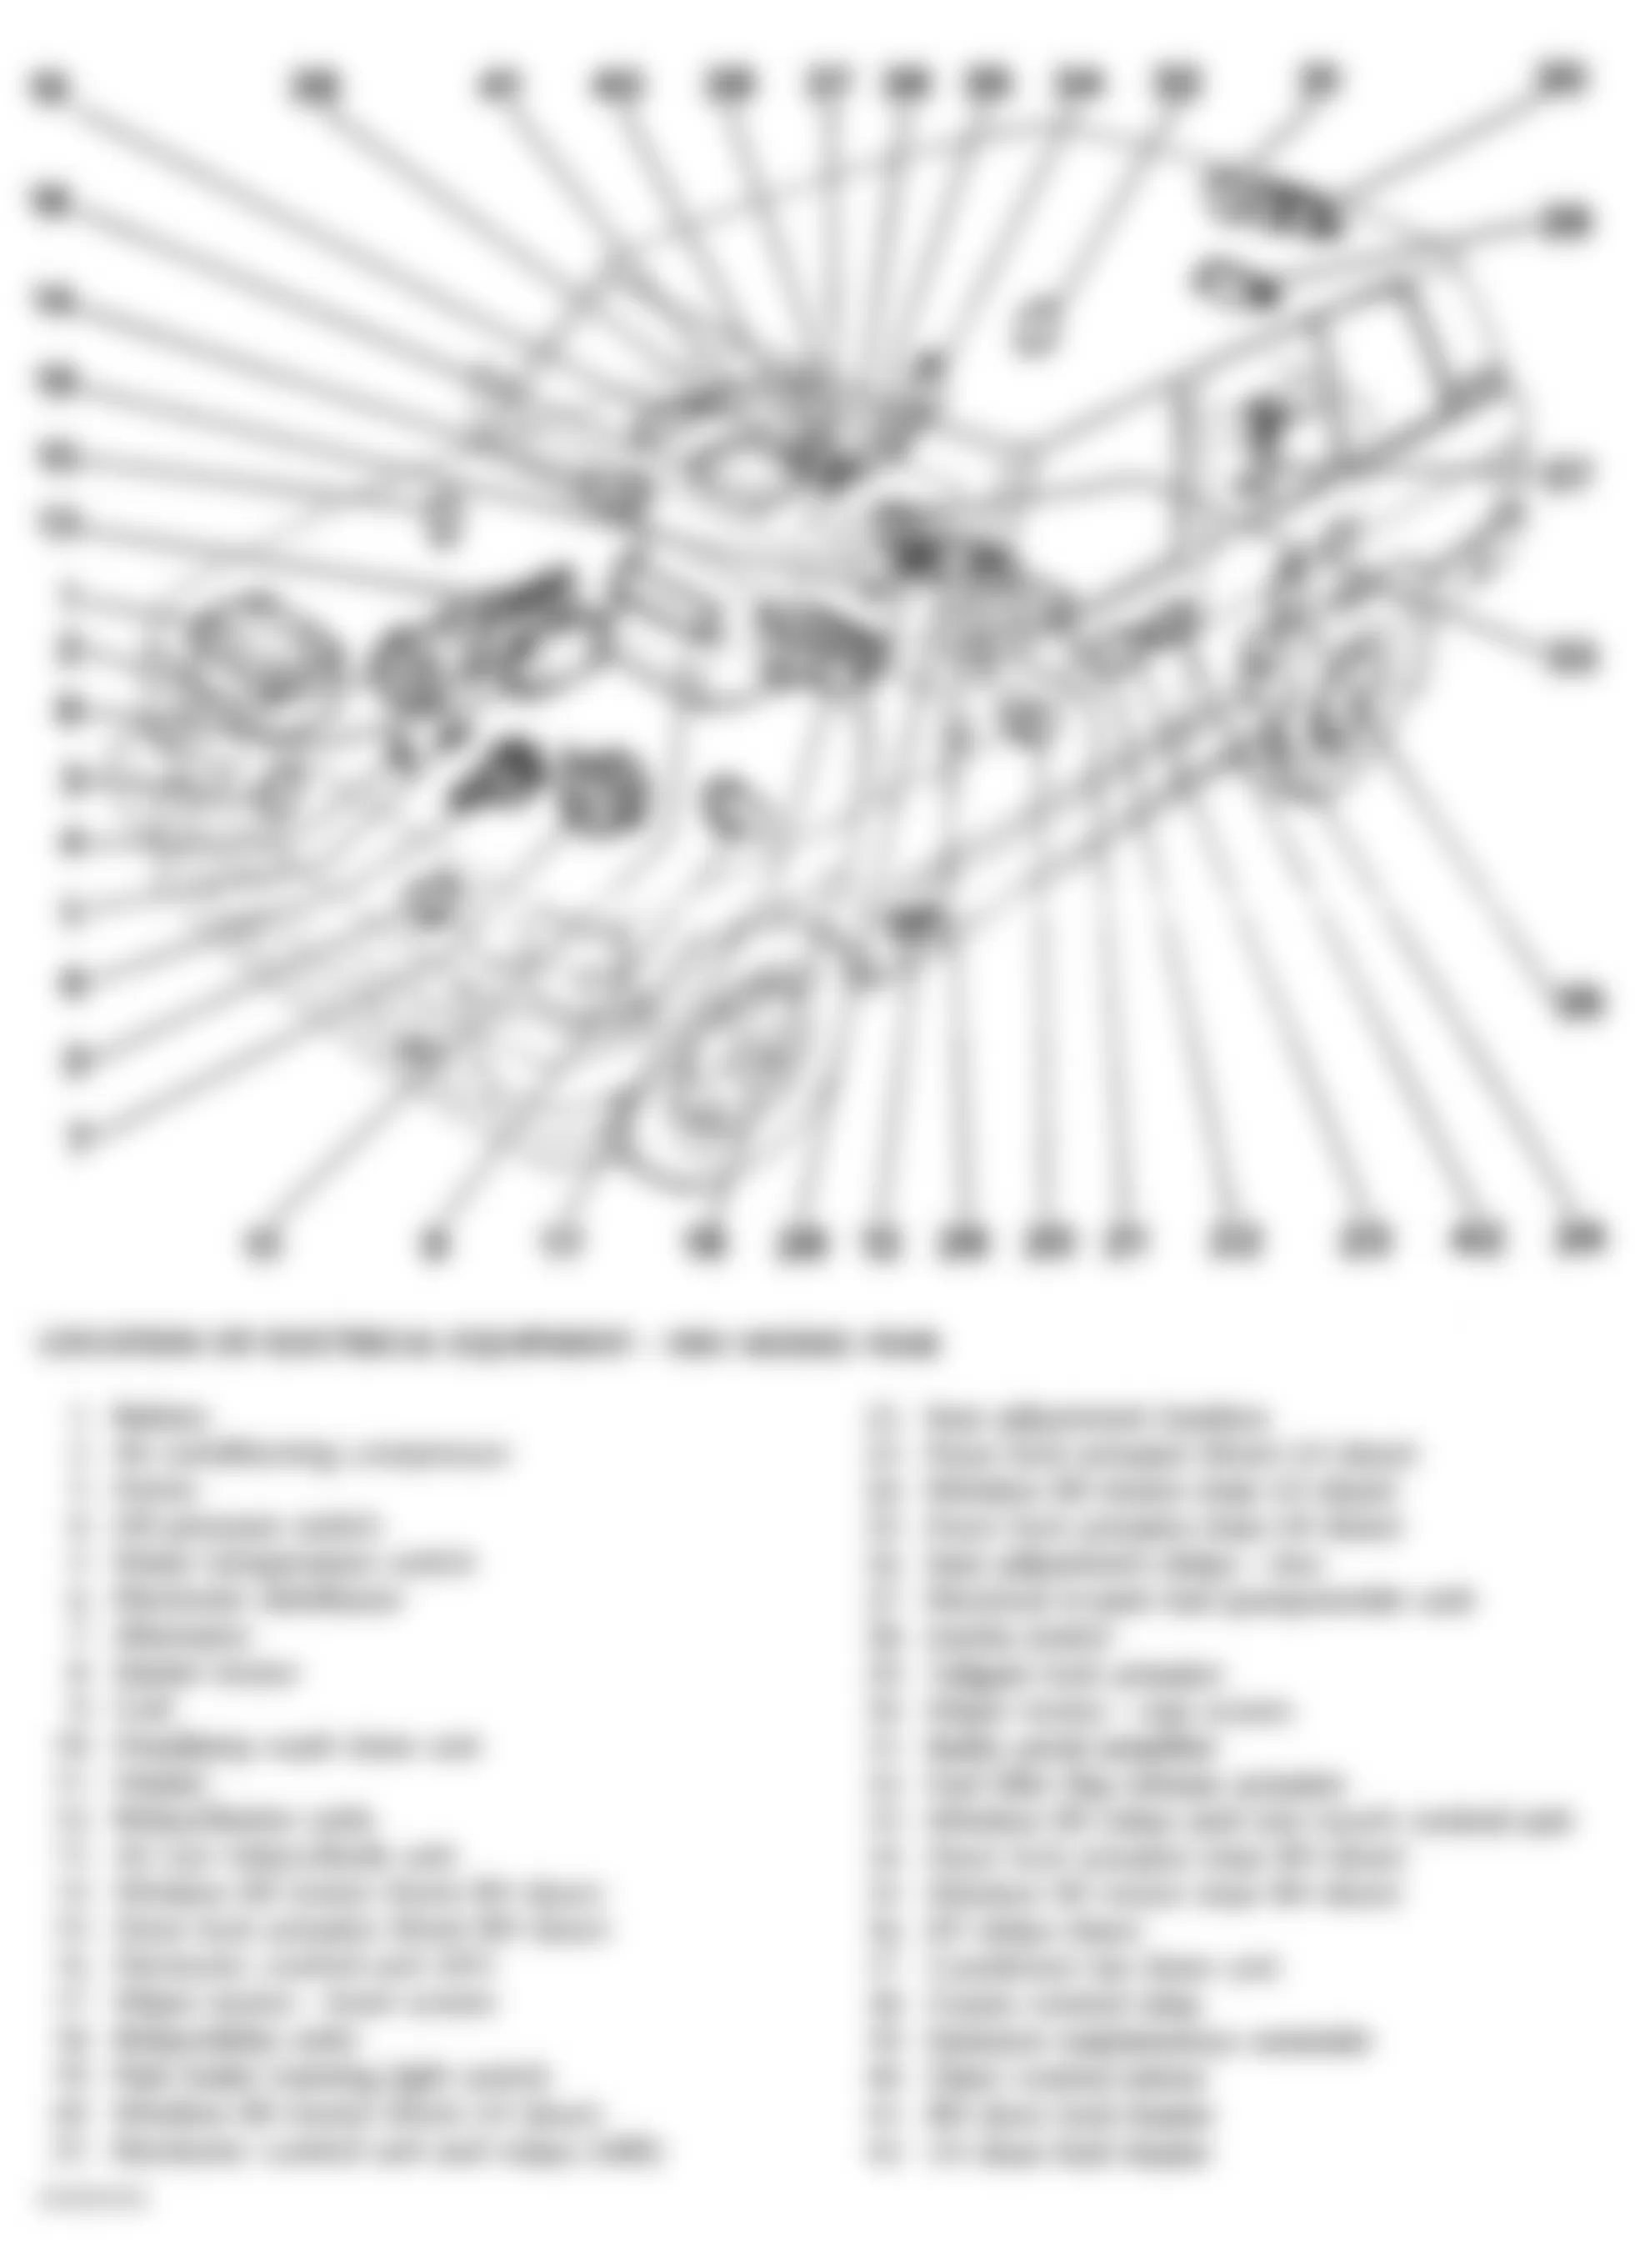 Land Rover Defender 90 1995 - Component Locations -  Component Locations - 1991